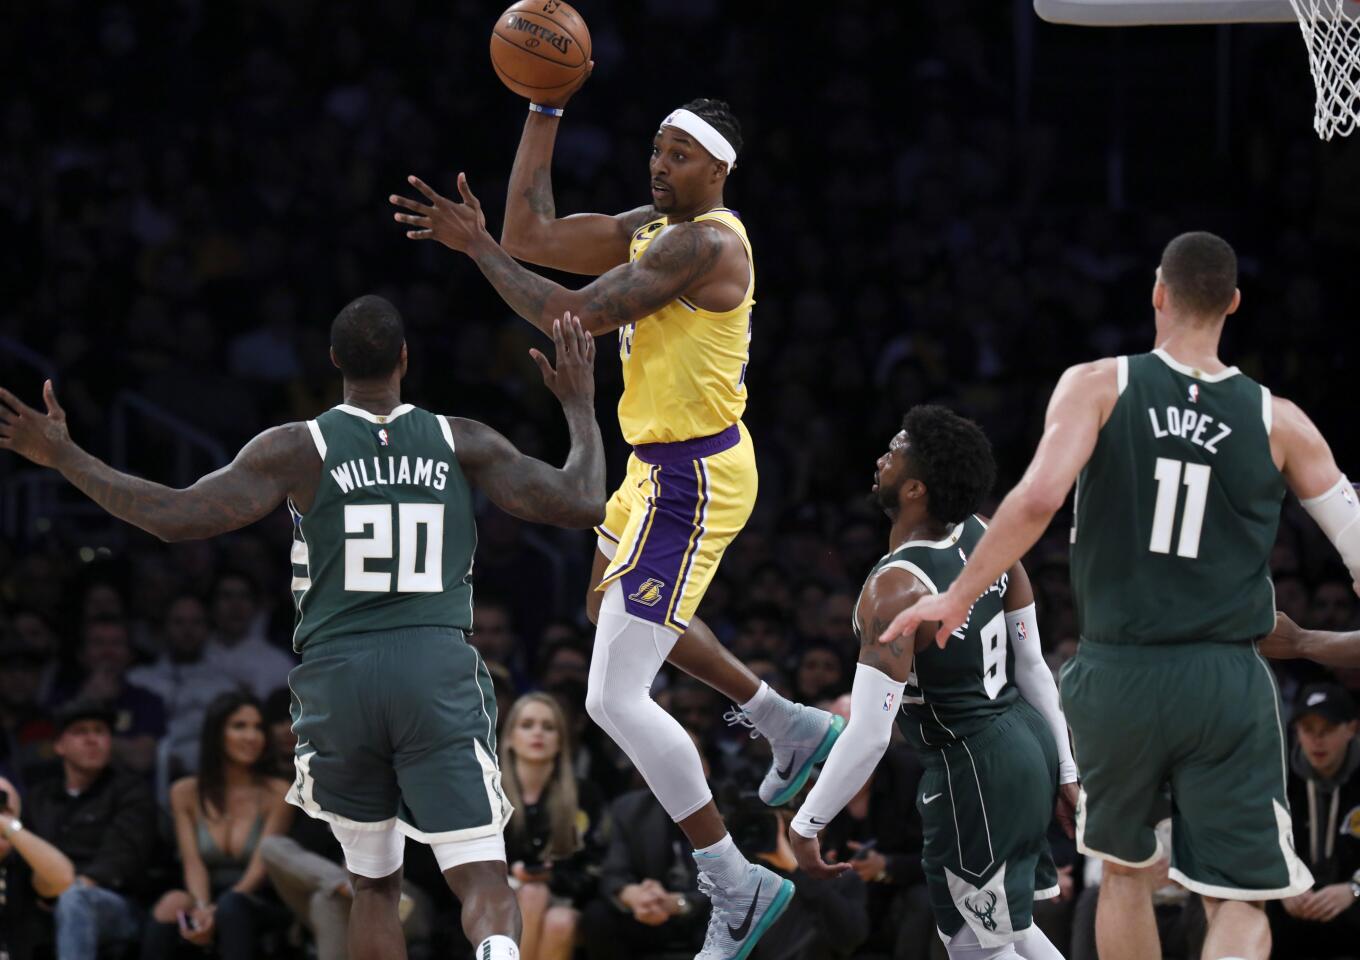 Lakers center Dwight Howard looks to pass during the first half of a game against the Bucks on March 6 at Staples Center.